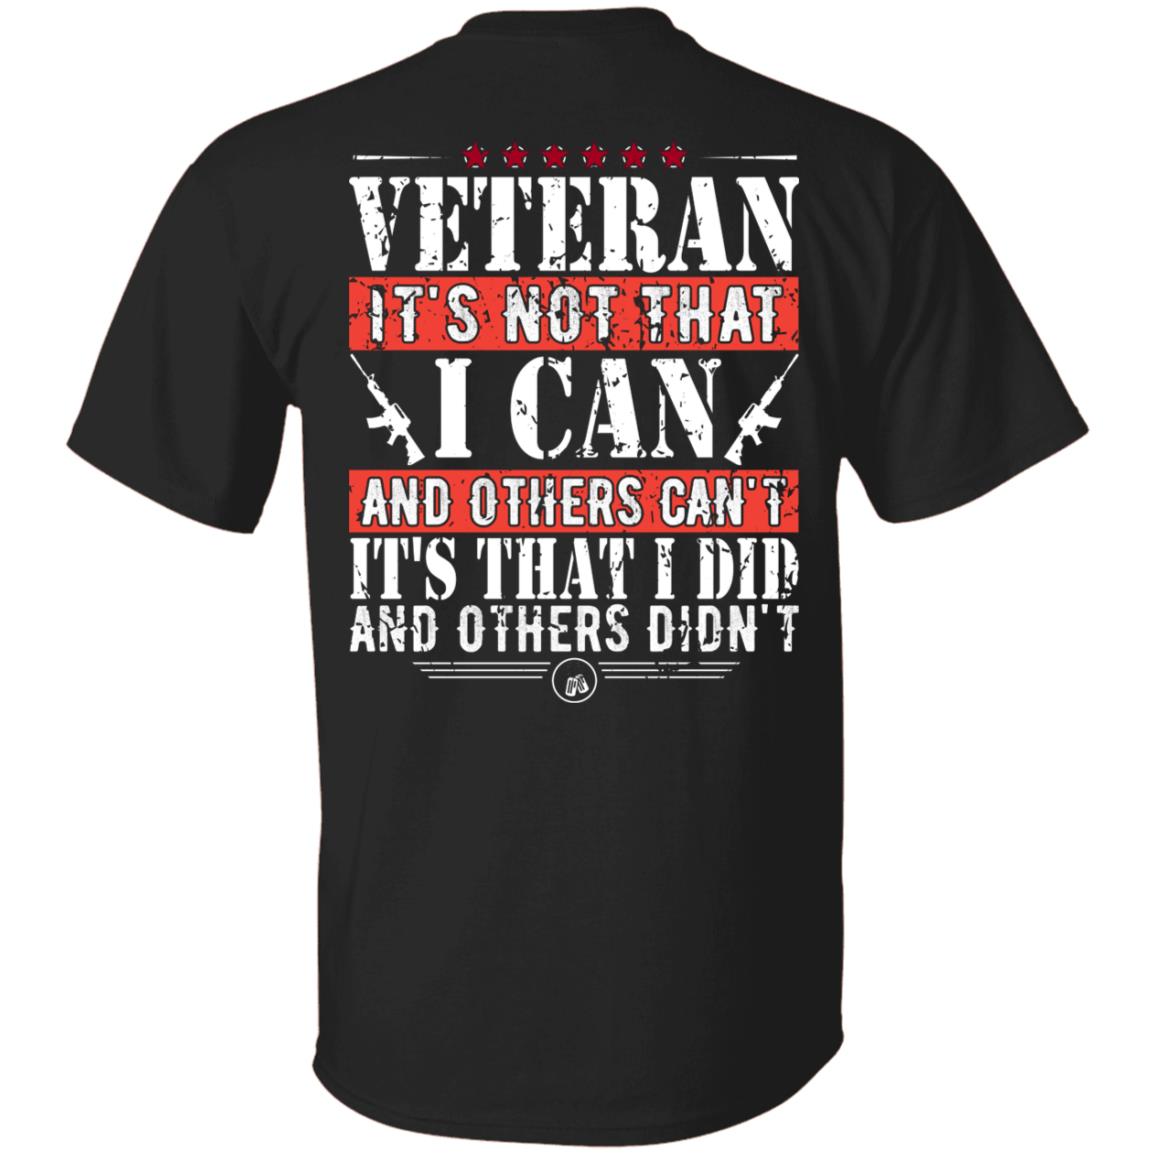 Veteran Its That I Did and Others Didn't US Veteran Shirt